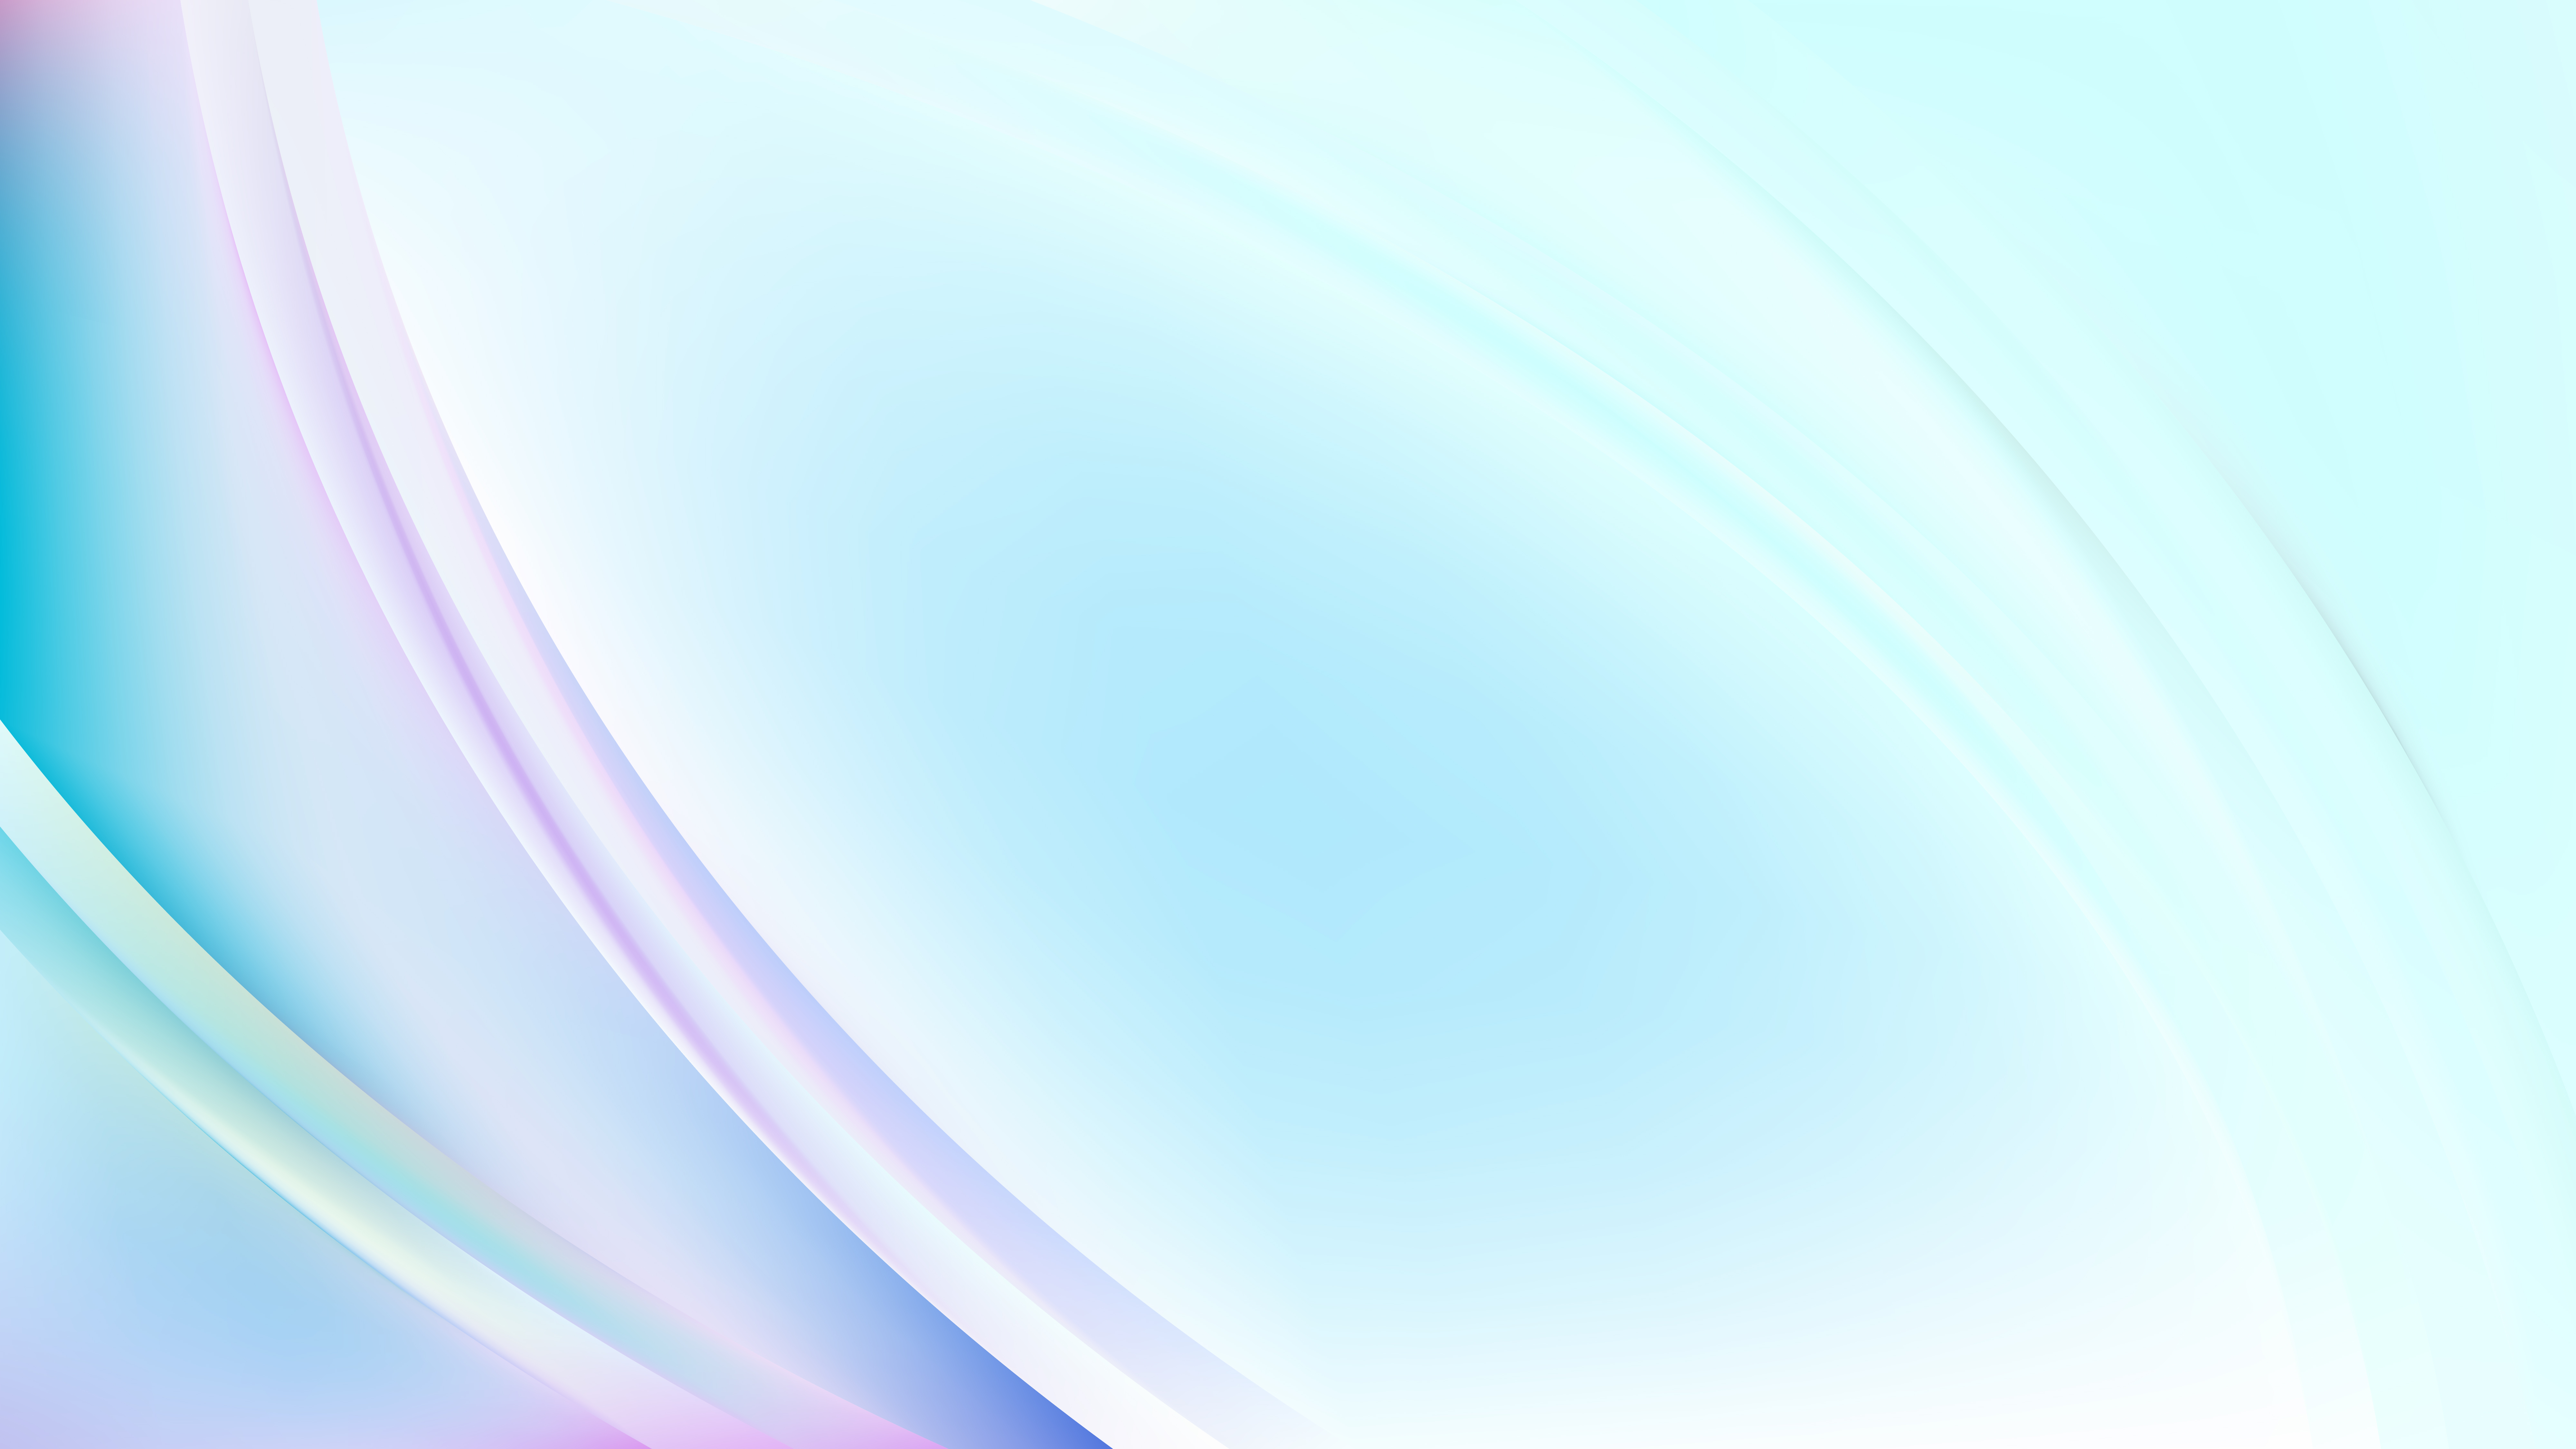 Free download Free Glowing Abstract Light Blue Wave Background Vector